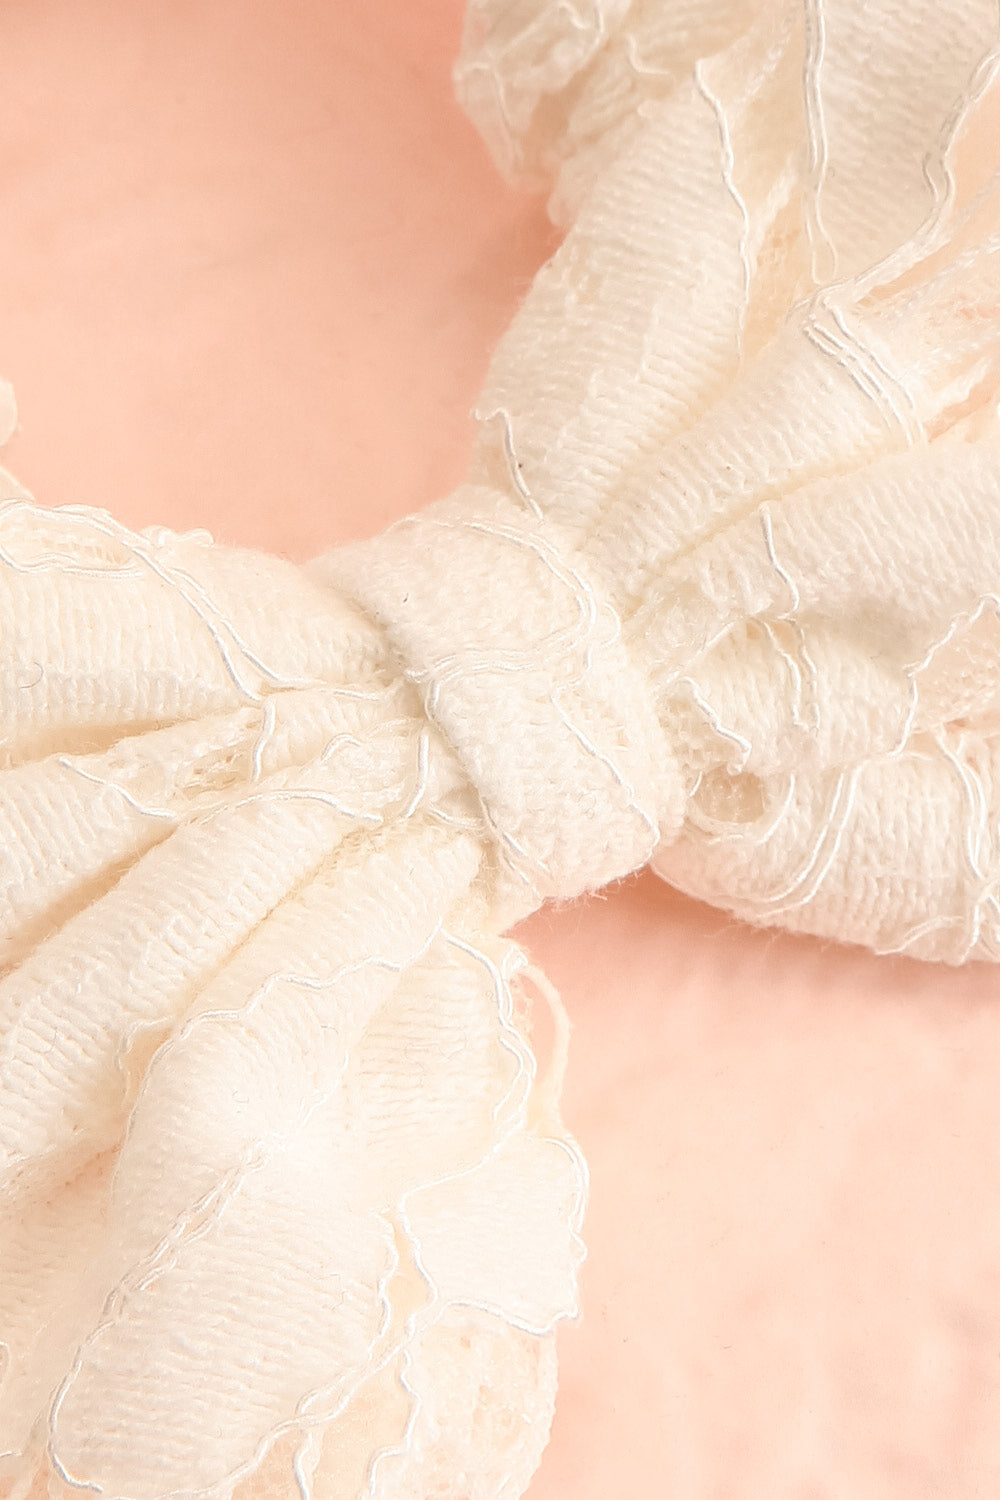 Eflyr White Lace Hair Scrunchie with Bow | Boutique 1861 close-up